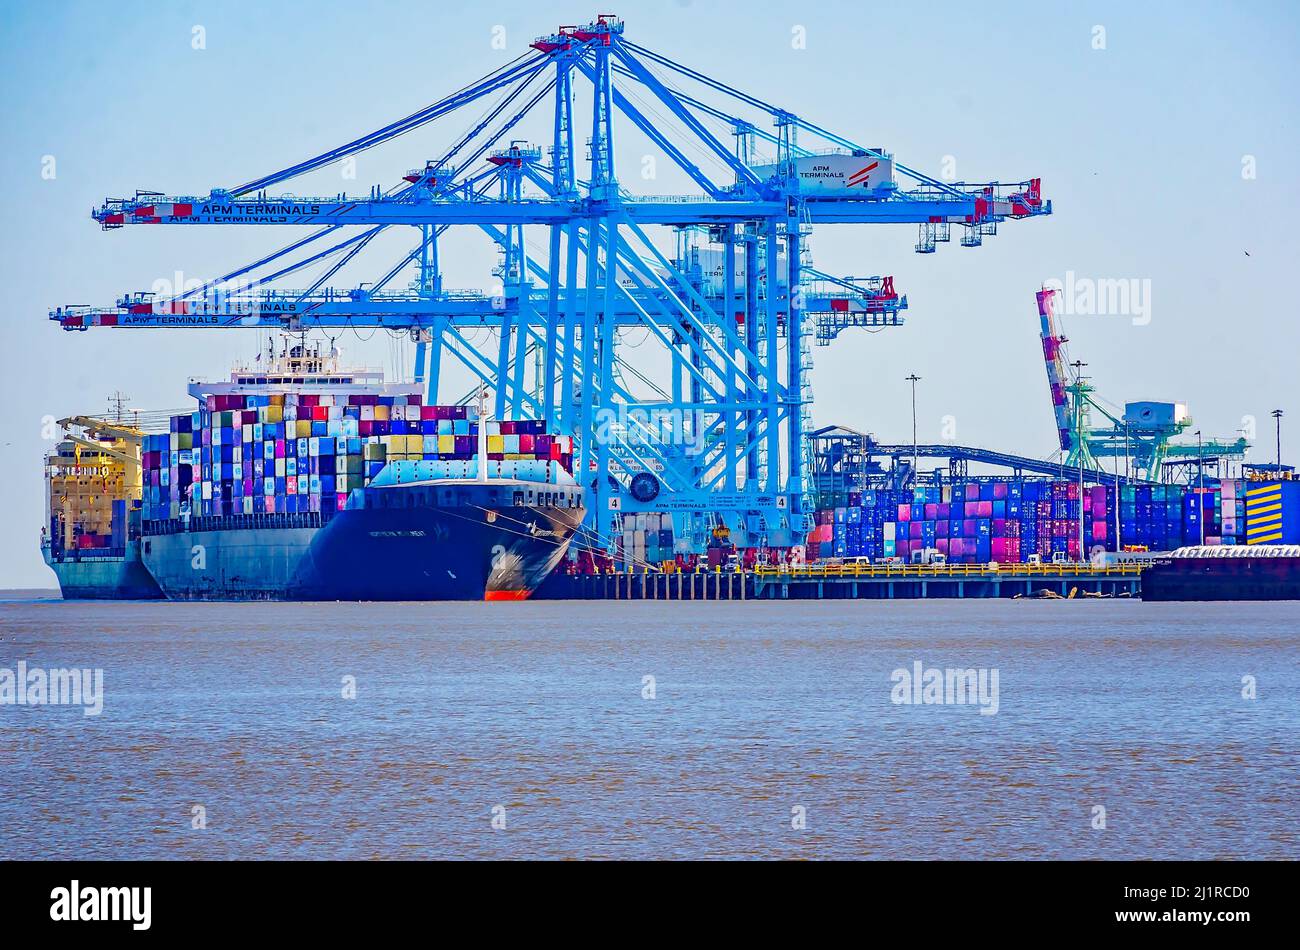 Northern Monument, a Portugese container ship, is docked at APM Terminals, March 25, 2022, in Mobile, Alabama. Northern Monument was built in 2004. Stock Photo